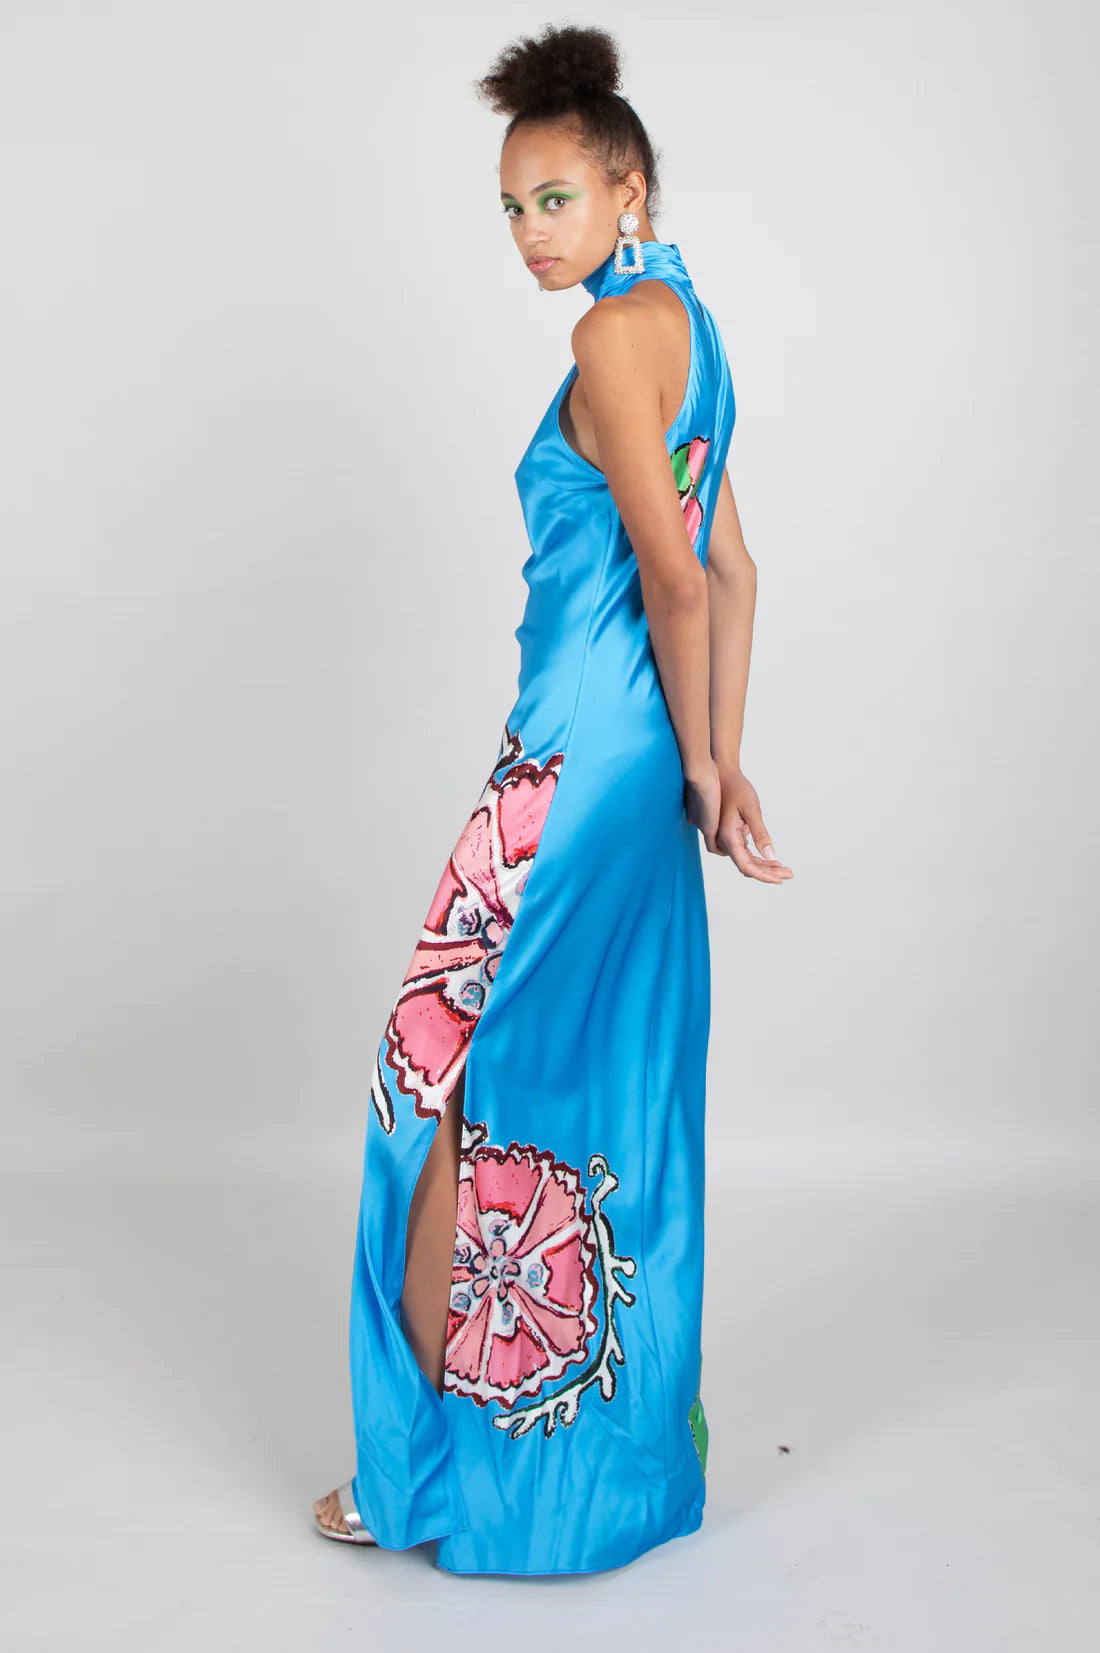 Sky blue halterneck silk dress with bold pink and white floral placement print design